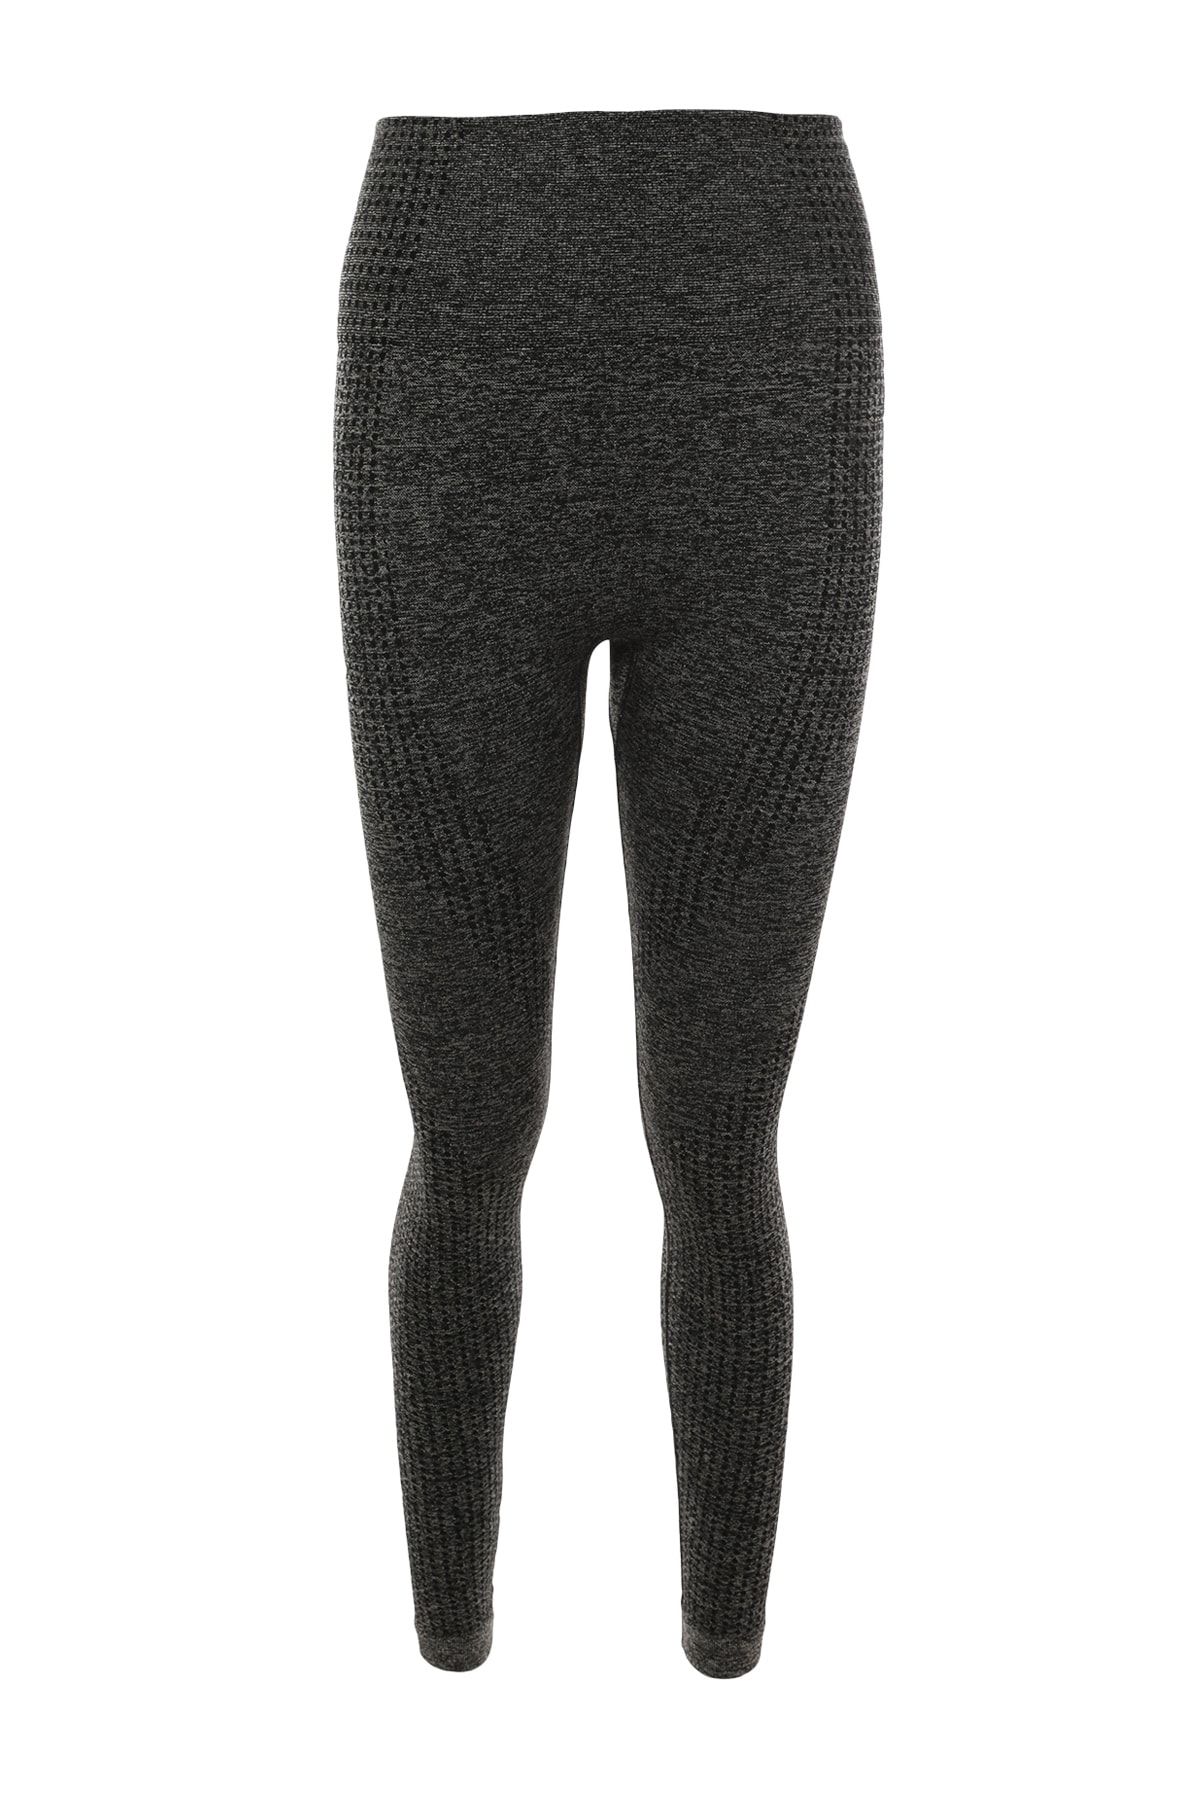 Trendyol Collection Anthracite Seamless/Seamless Contrast Color Detailed  Full Length Knitted Sports Tights TWOAW23TY00030 - Trendyol